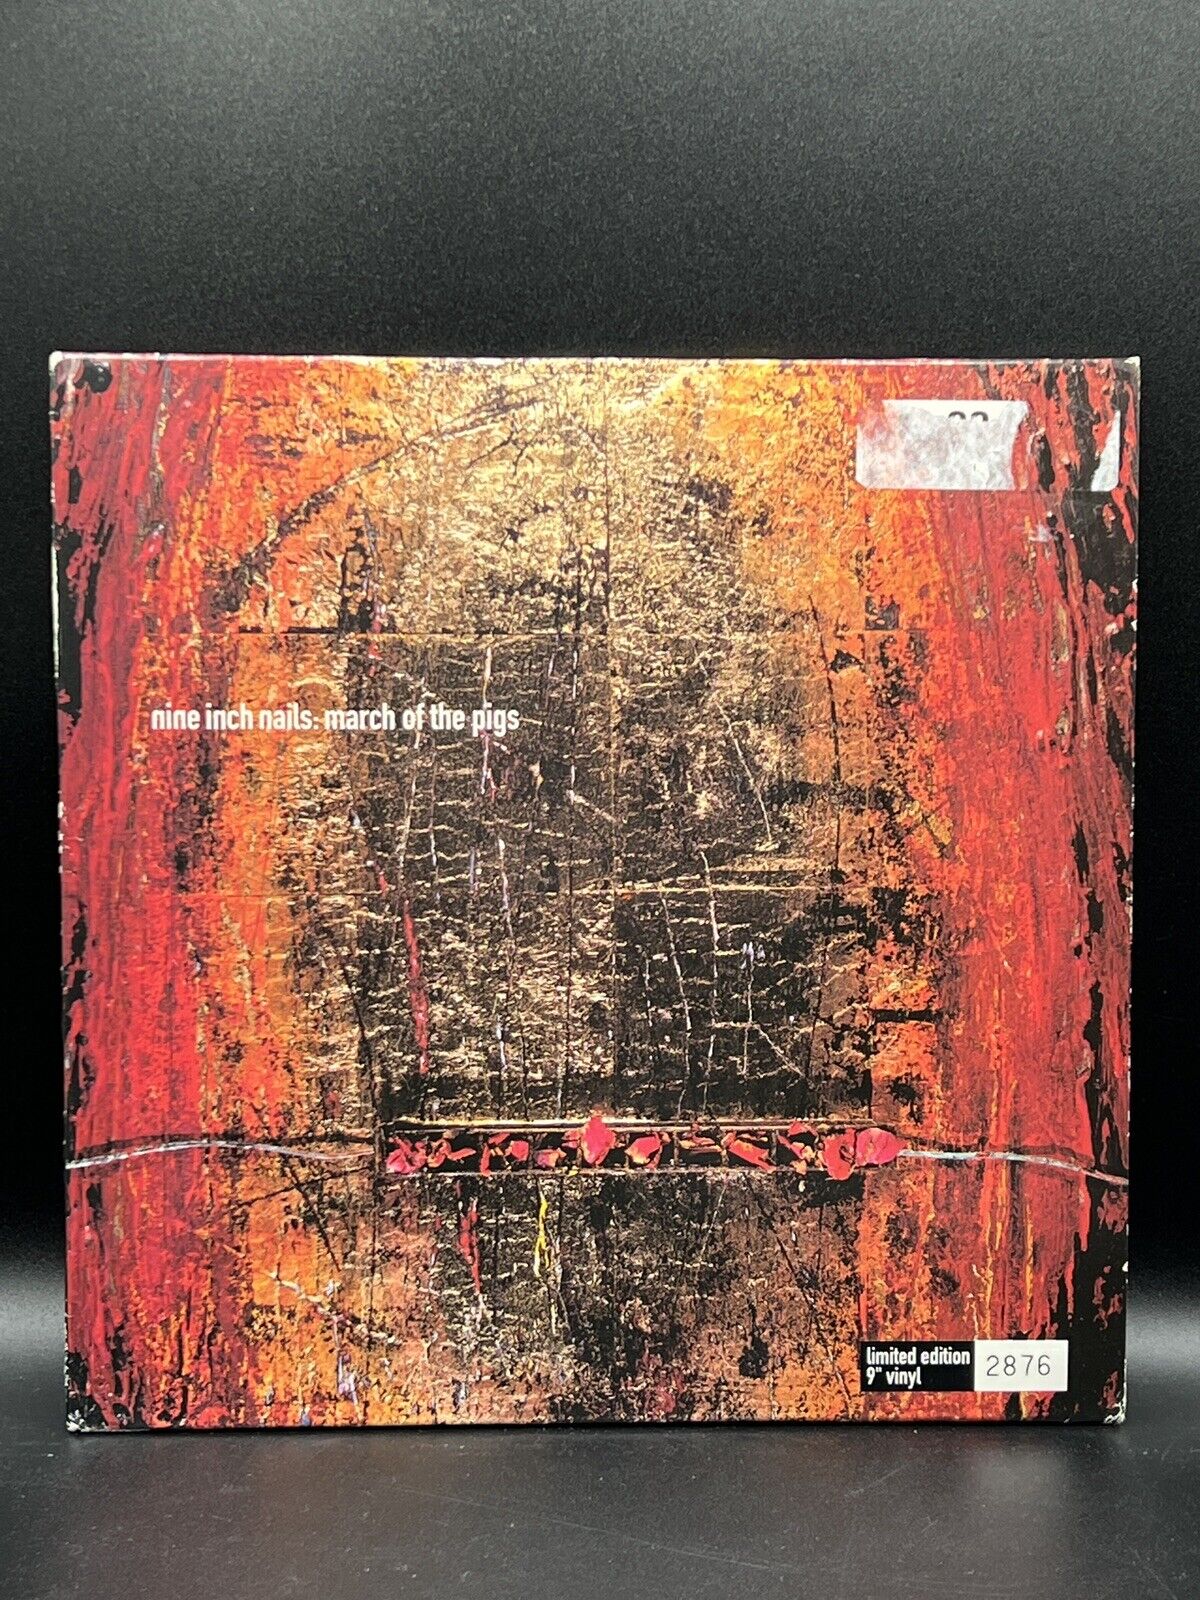 Nine Inch Nails - March of the Pigs 9” Limited Ed. Single 1994 - Trent  Reznor 42285400106 | eBay